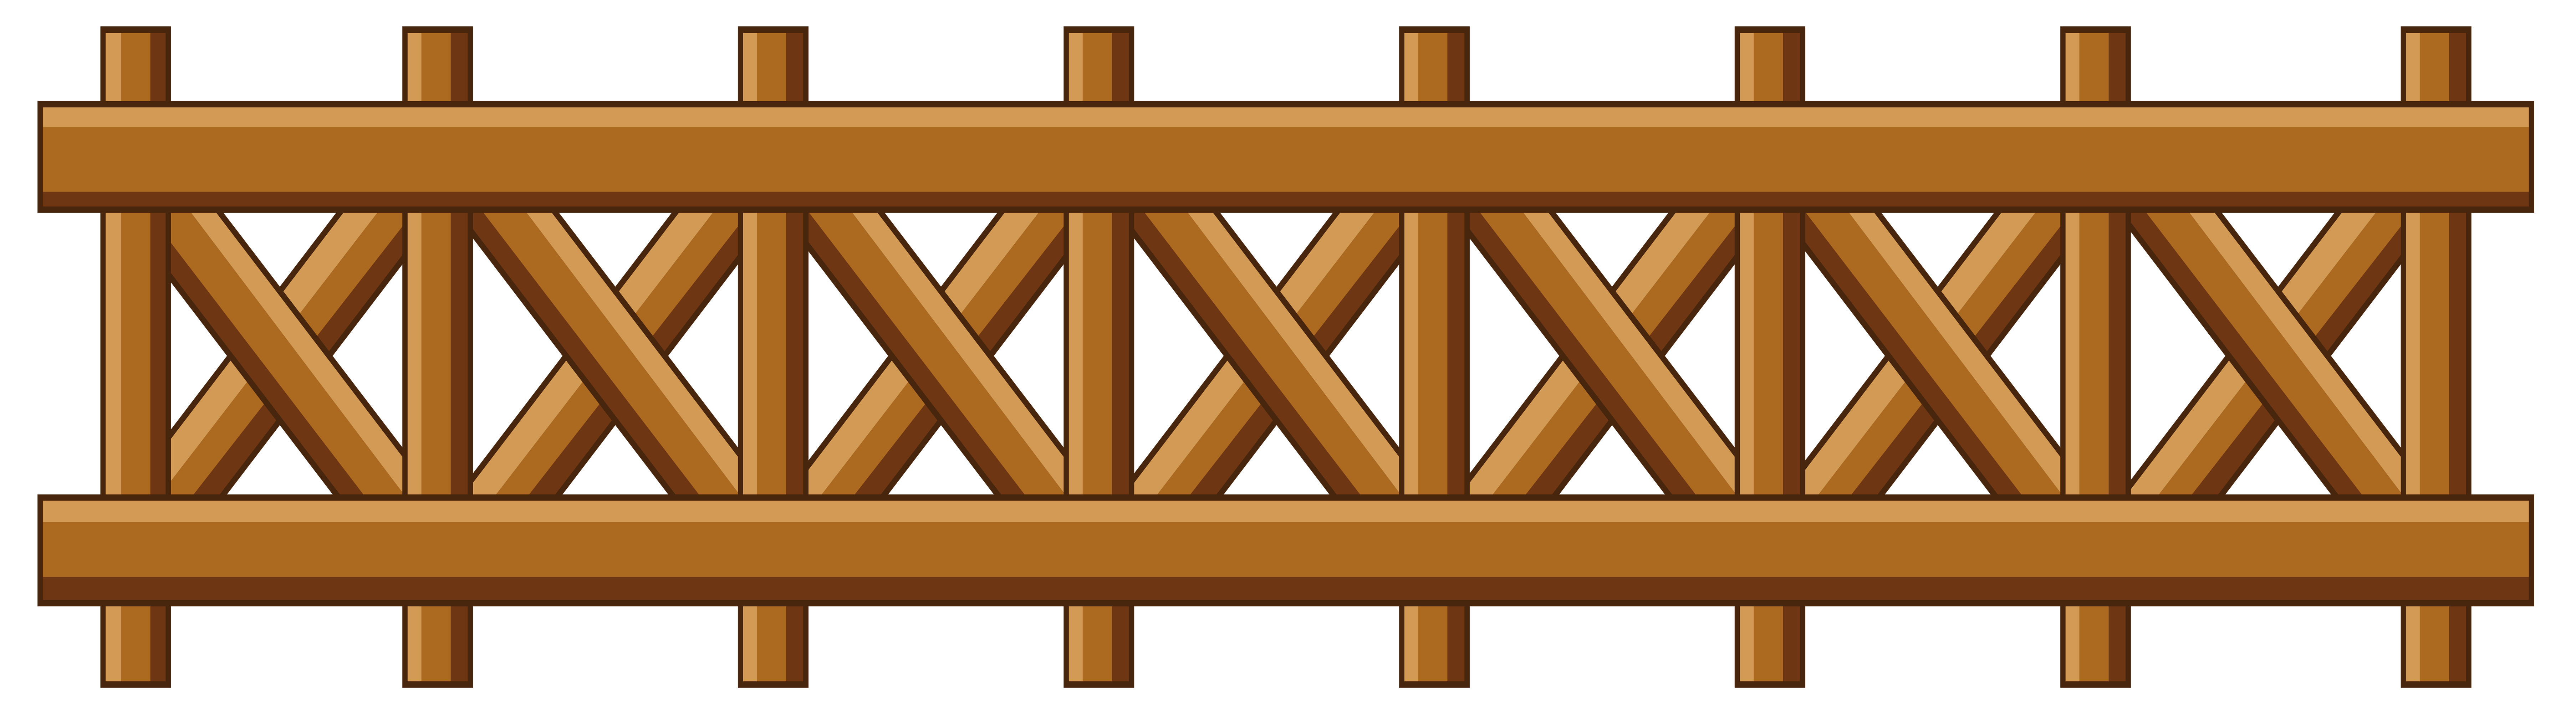 free-wood-fence-cliparts-download-free-wood-fence-cliparts-png-images